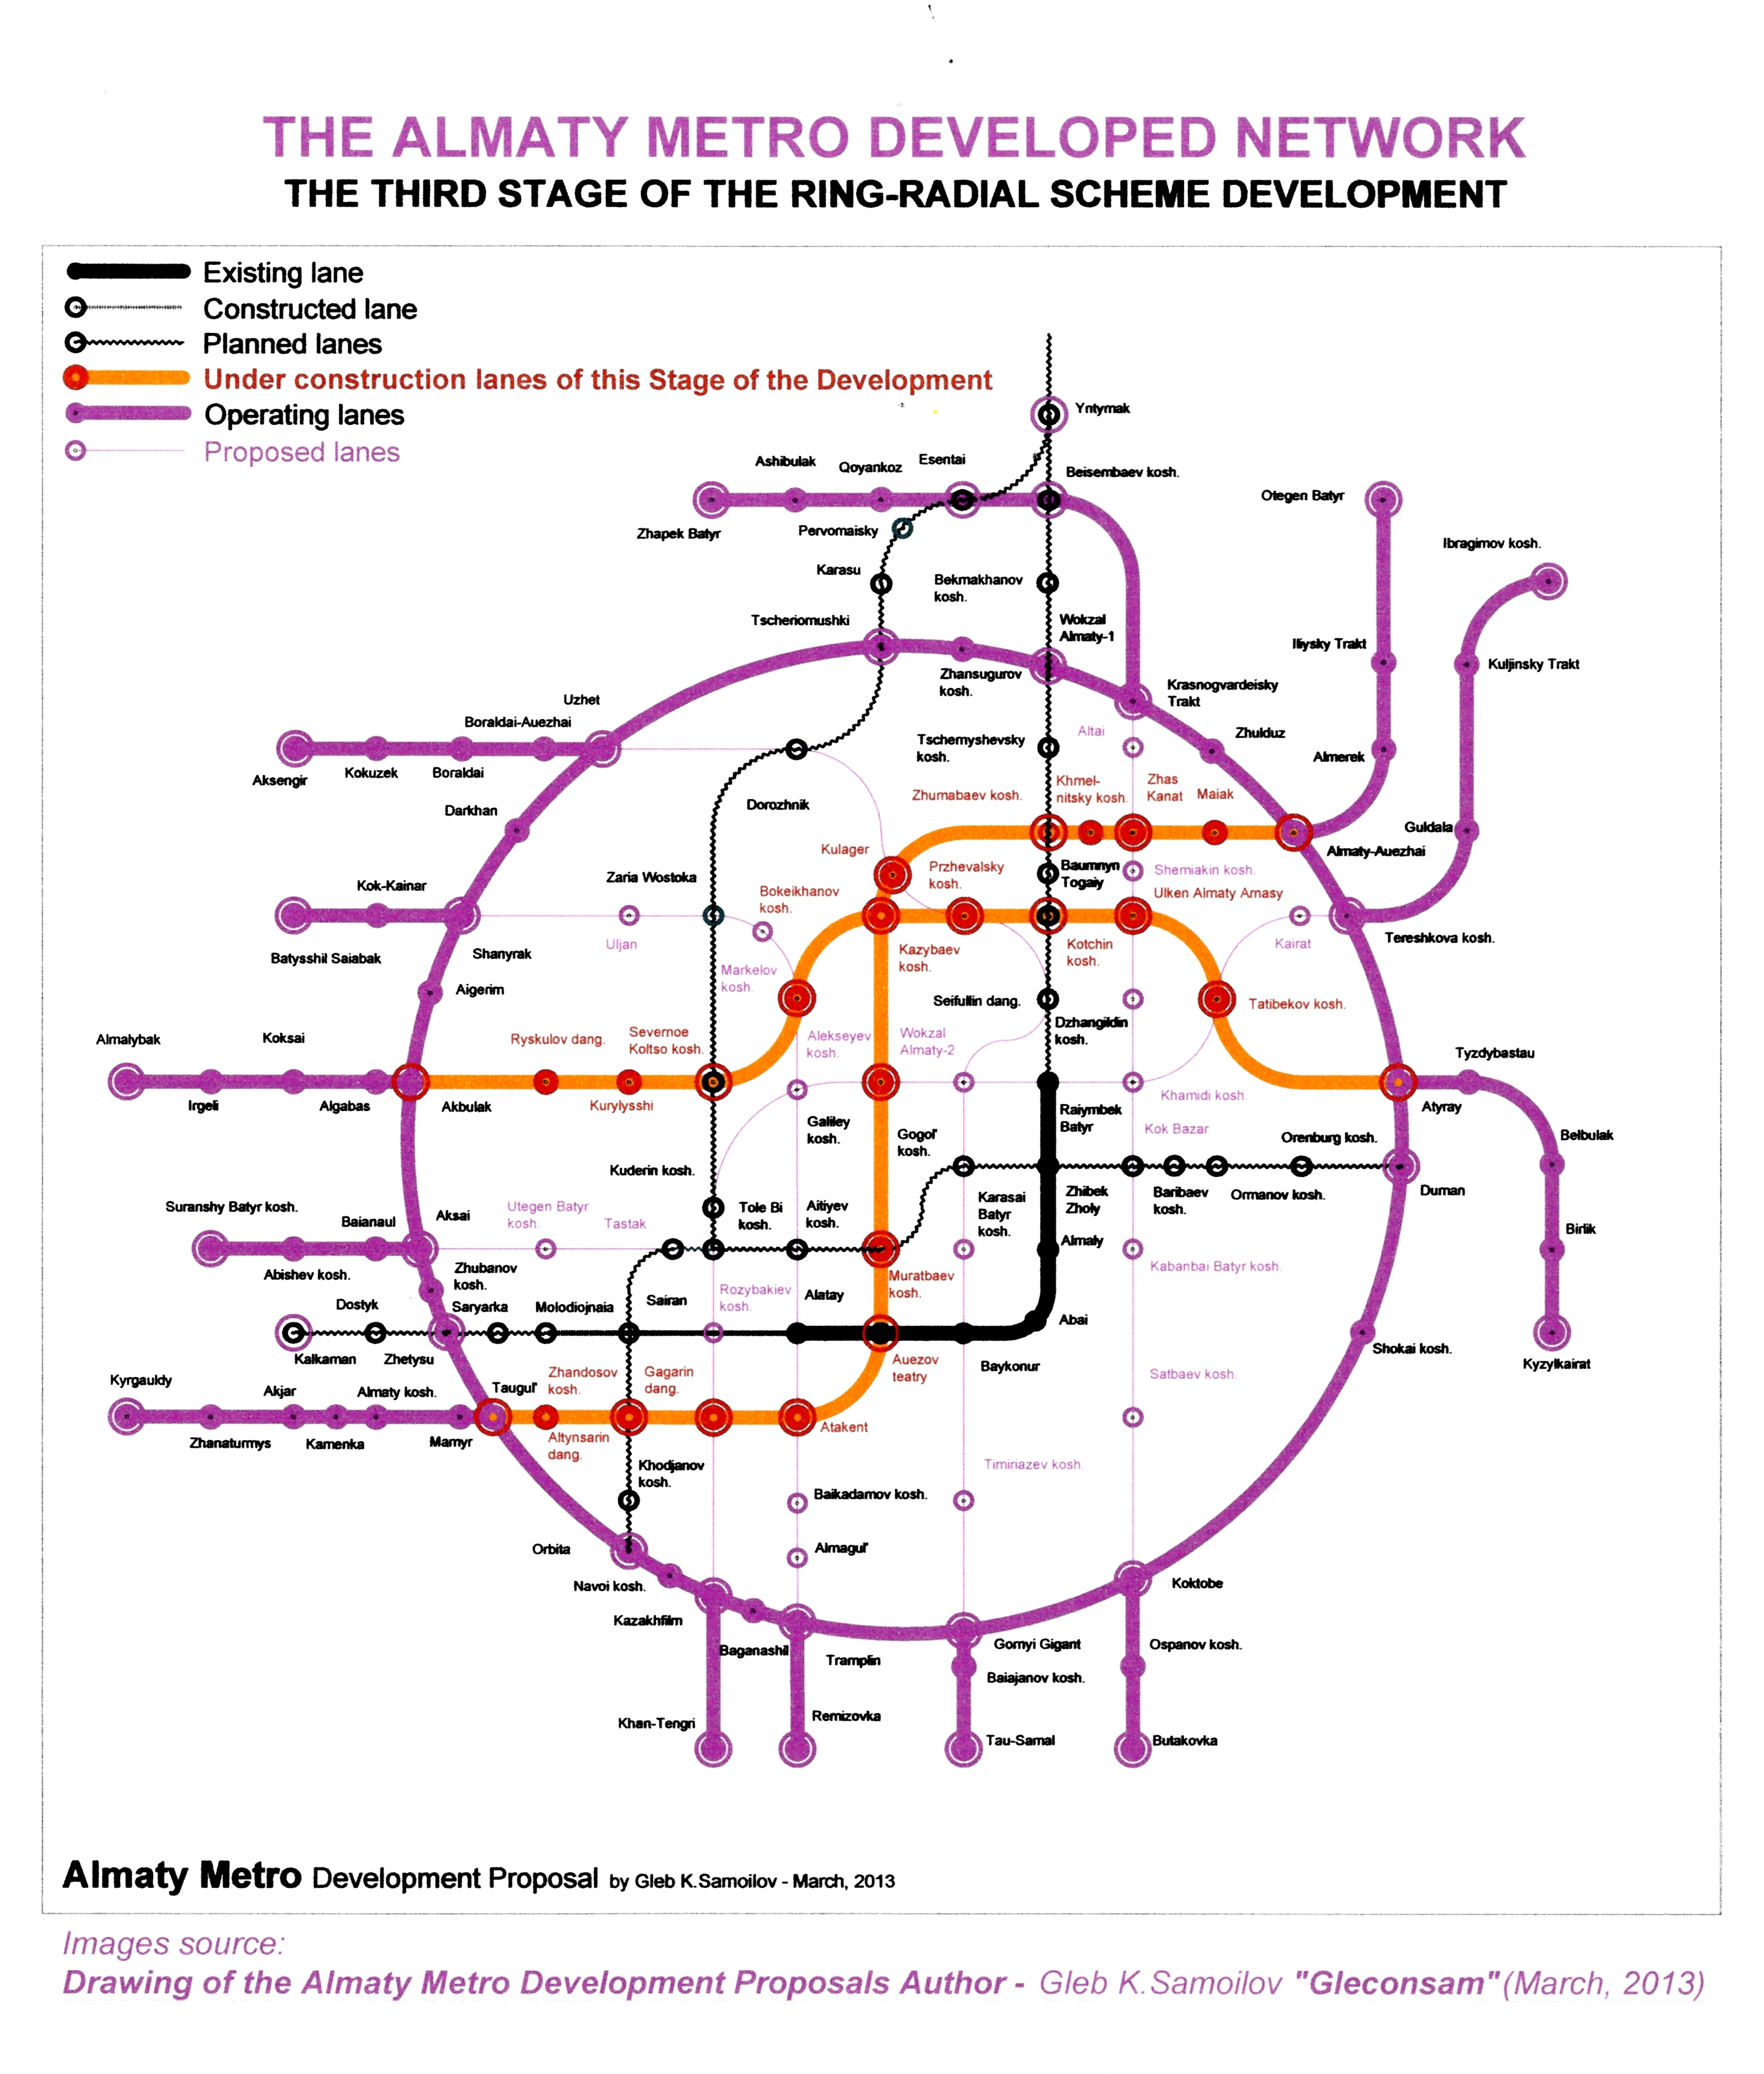 THE ALMATY METRO – the Third Stage of the proposed Ring-Radial scheme development  